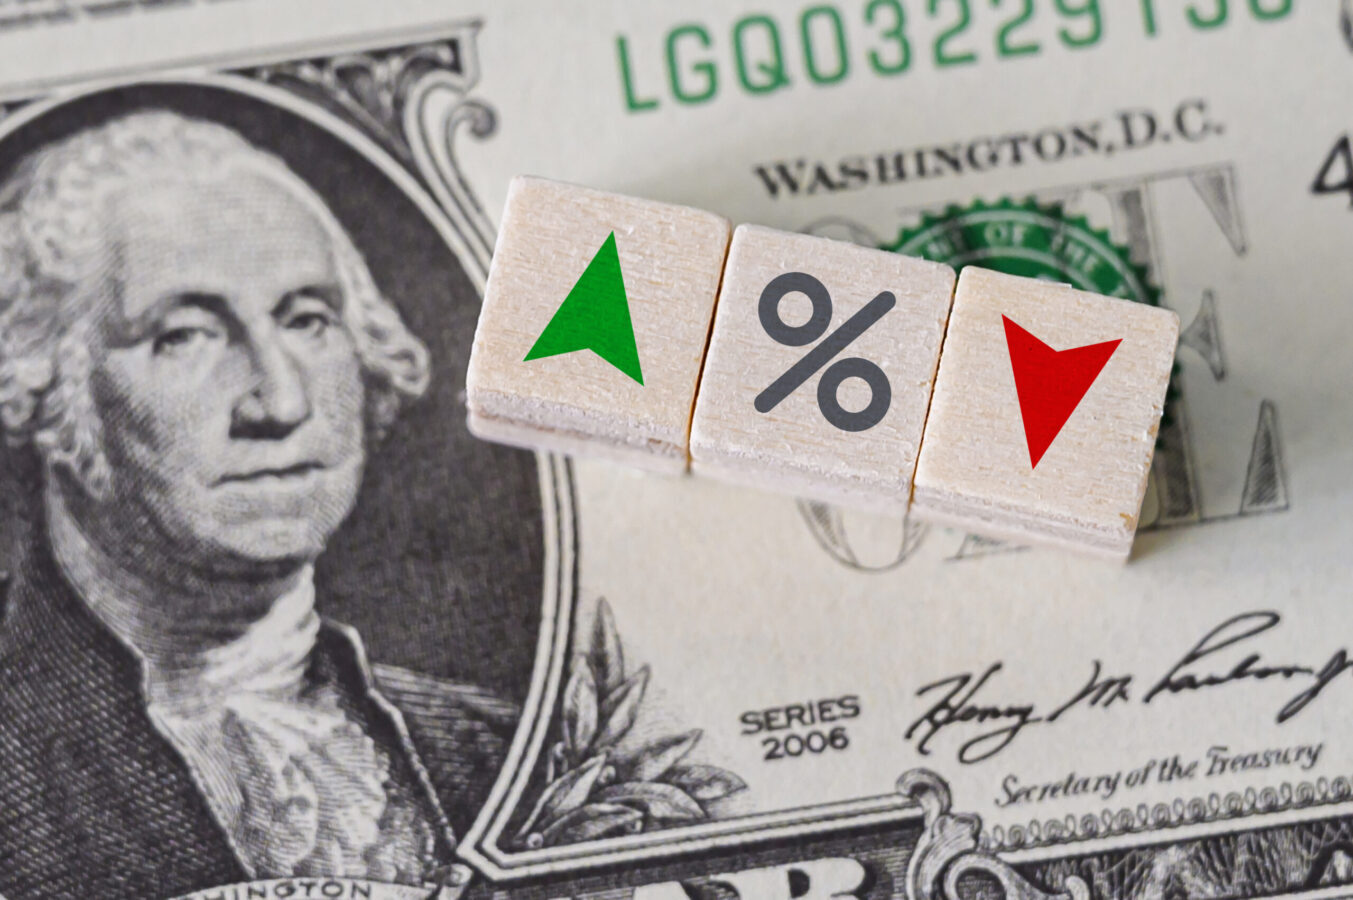 Why Are Stocks Down Today. a photo of a dollar bill with three pieces of dice on it, which show a green "up" arrow, a percentage sign, and a red "down" arrow, respectively